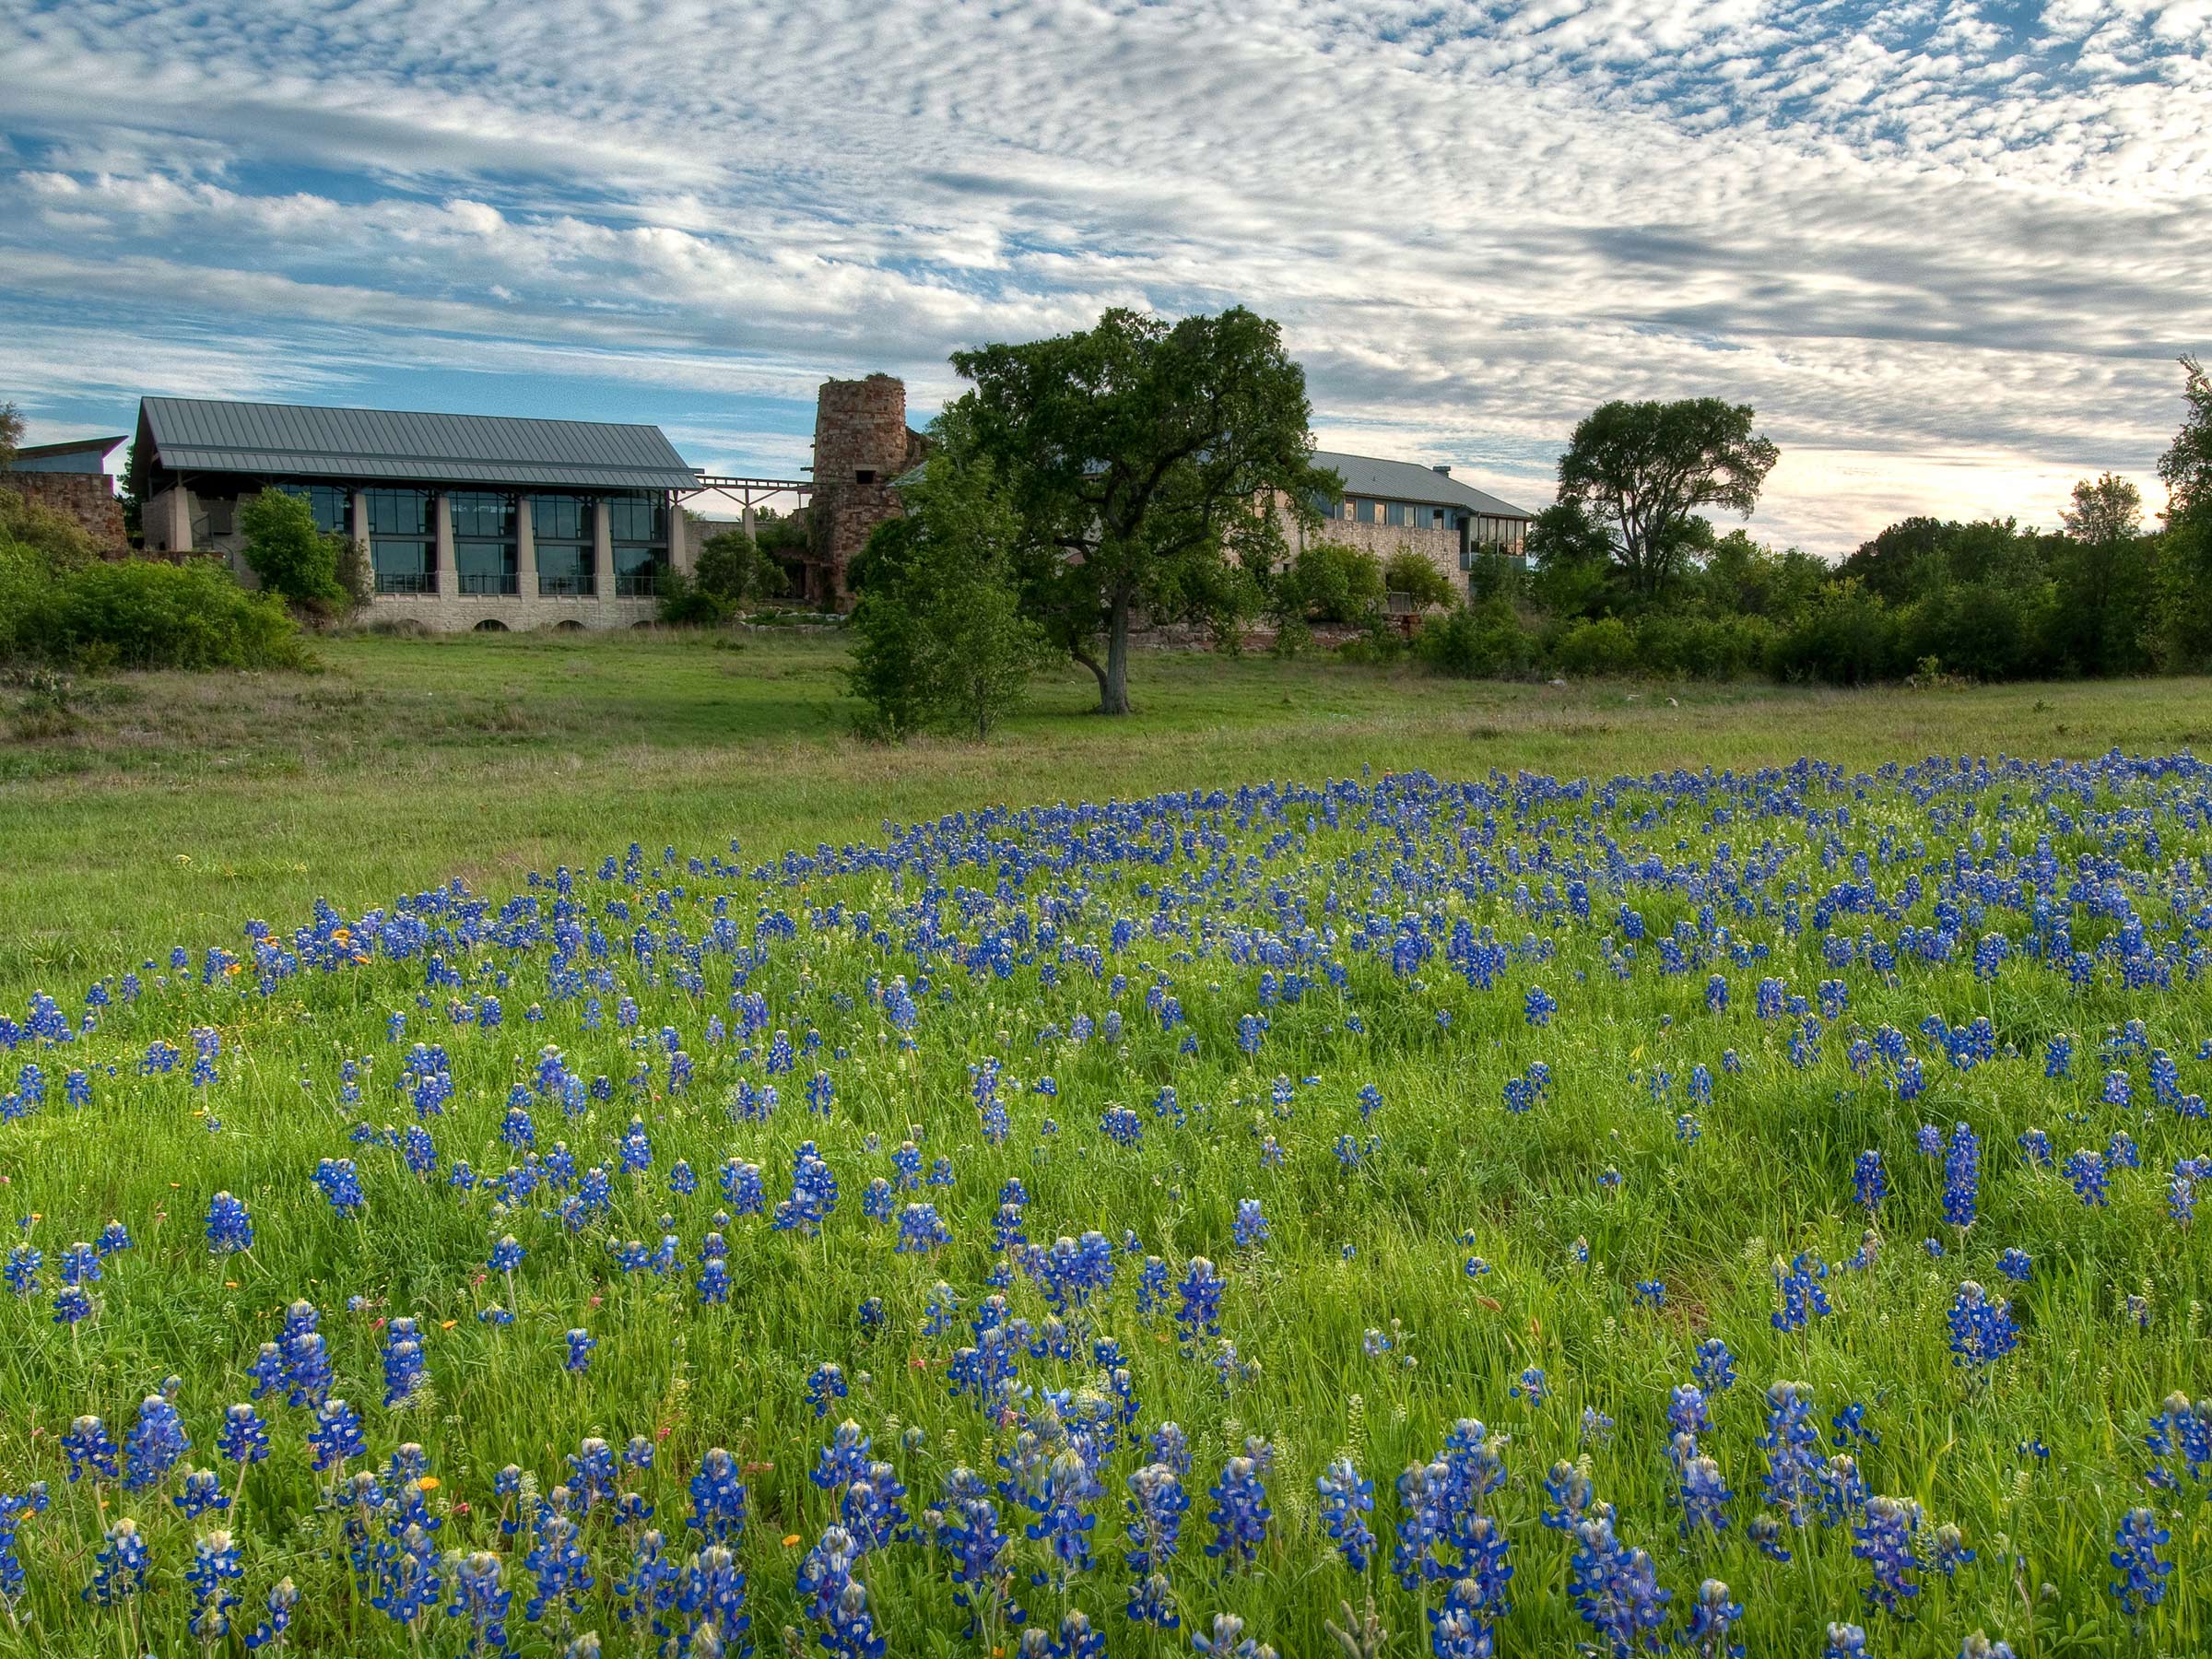 A photo of the Wildflower Center's facilities with a field of bluebonnet flowers in the foreground.